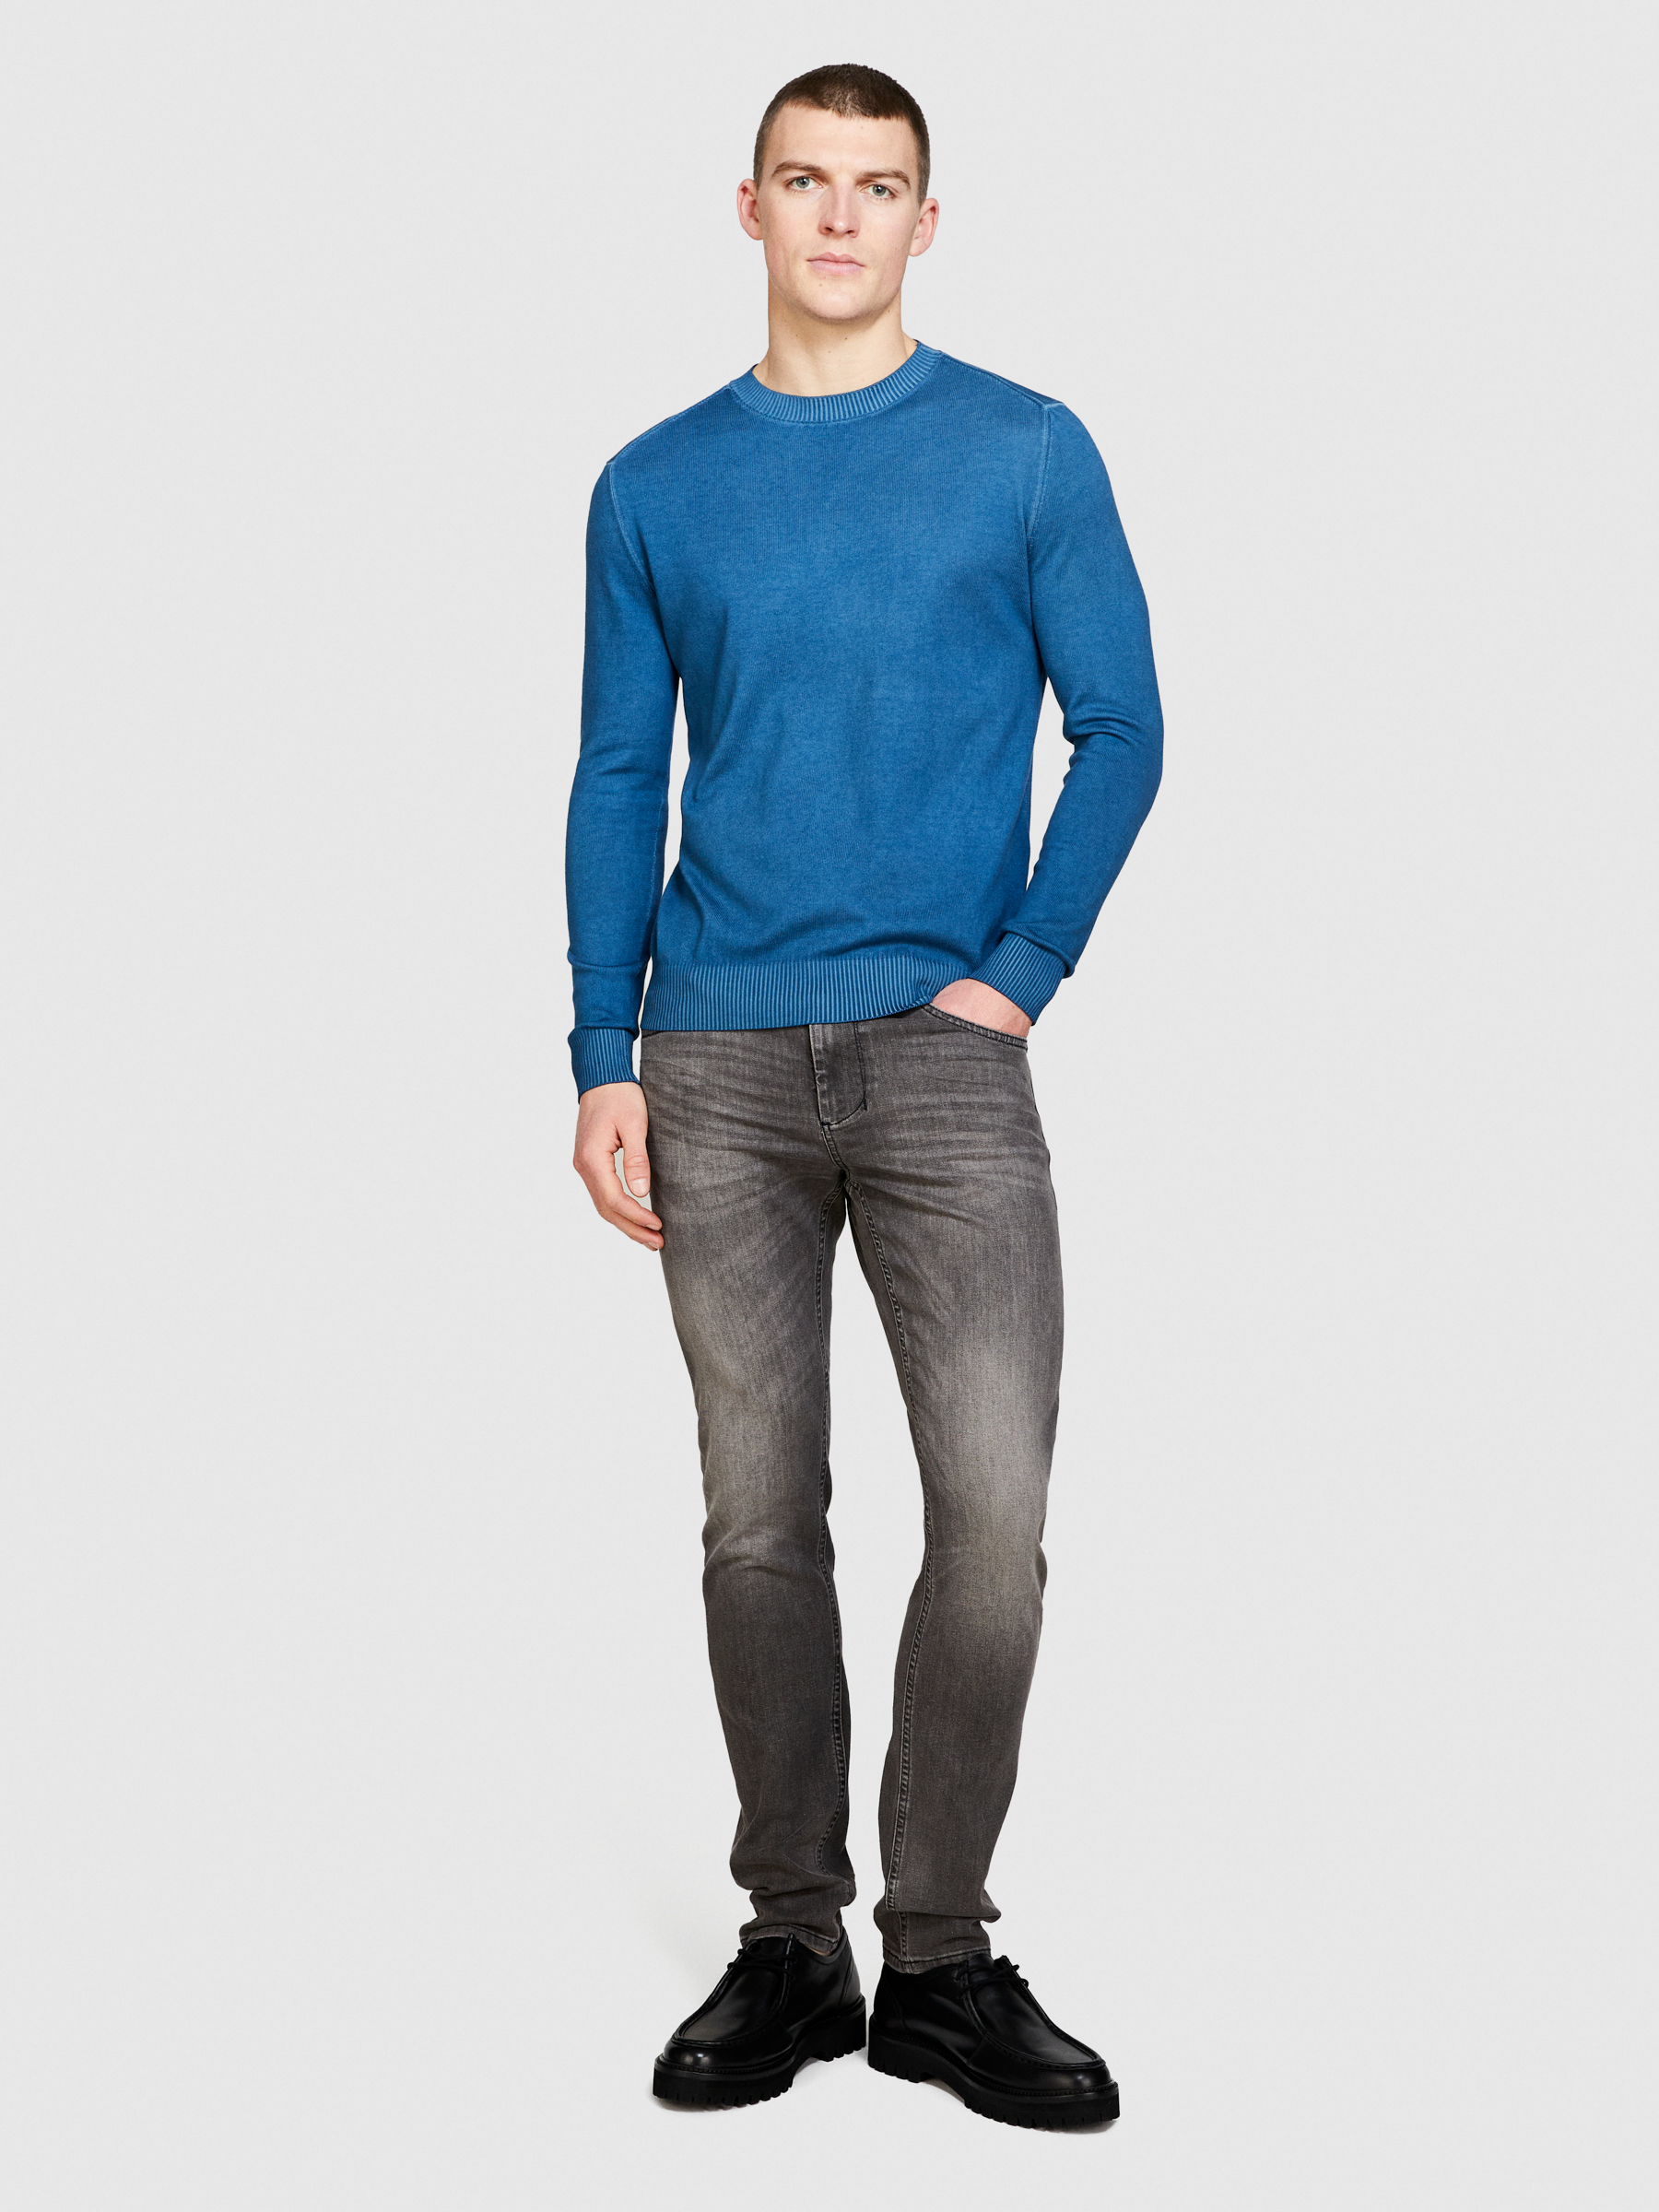 Sisley - Ombre Sweater, Man, Blue, Size: L